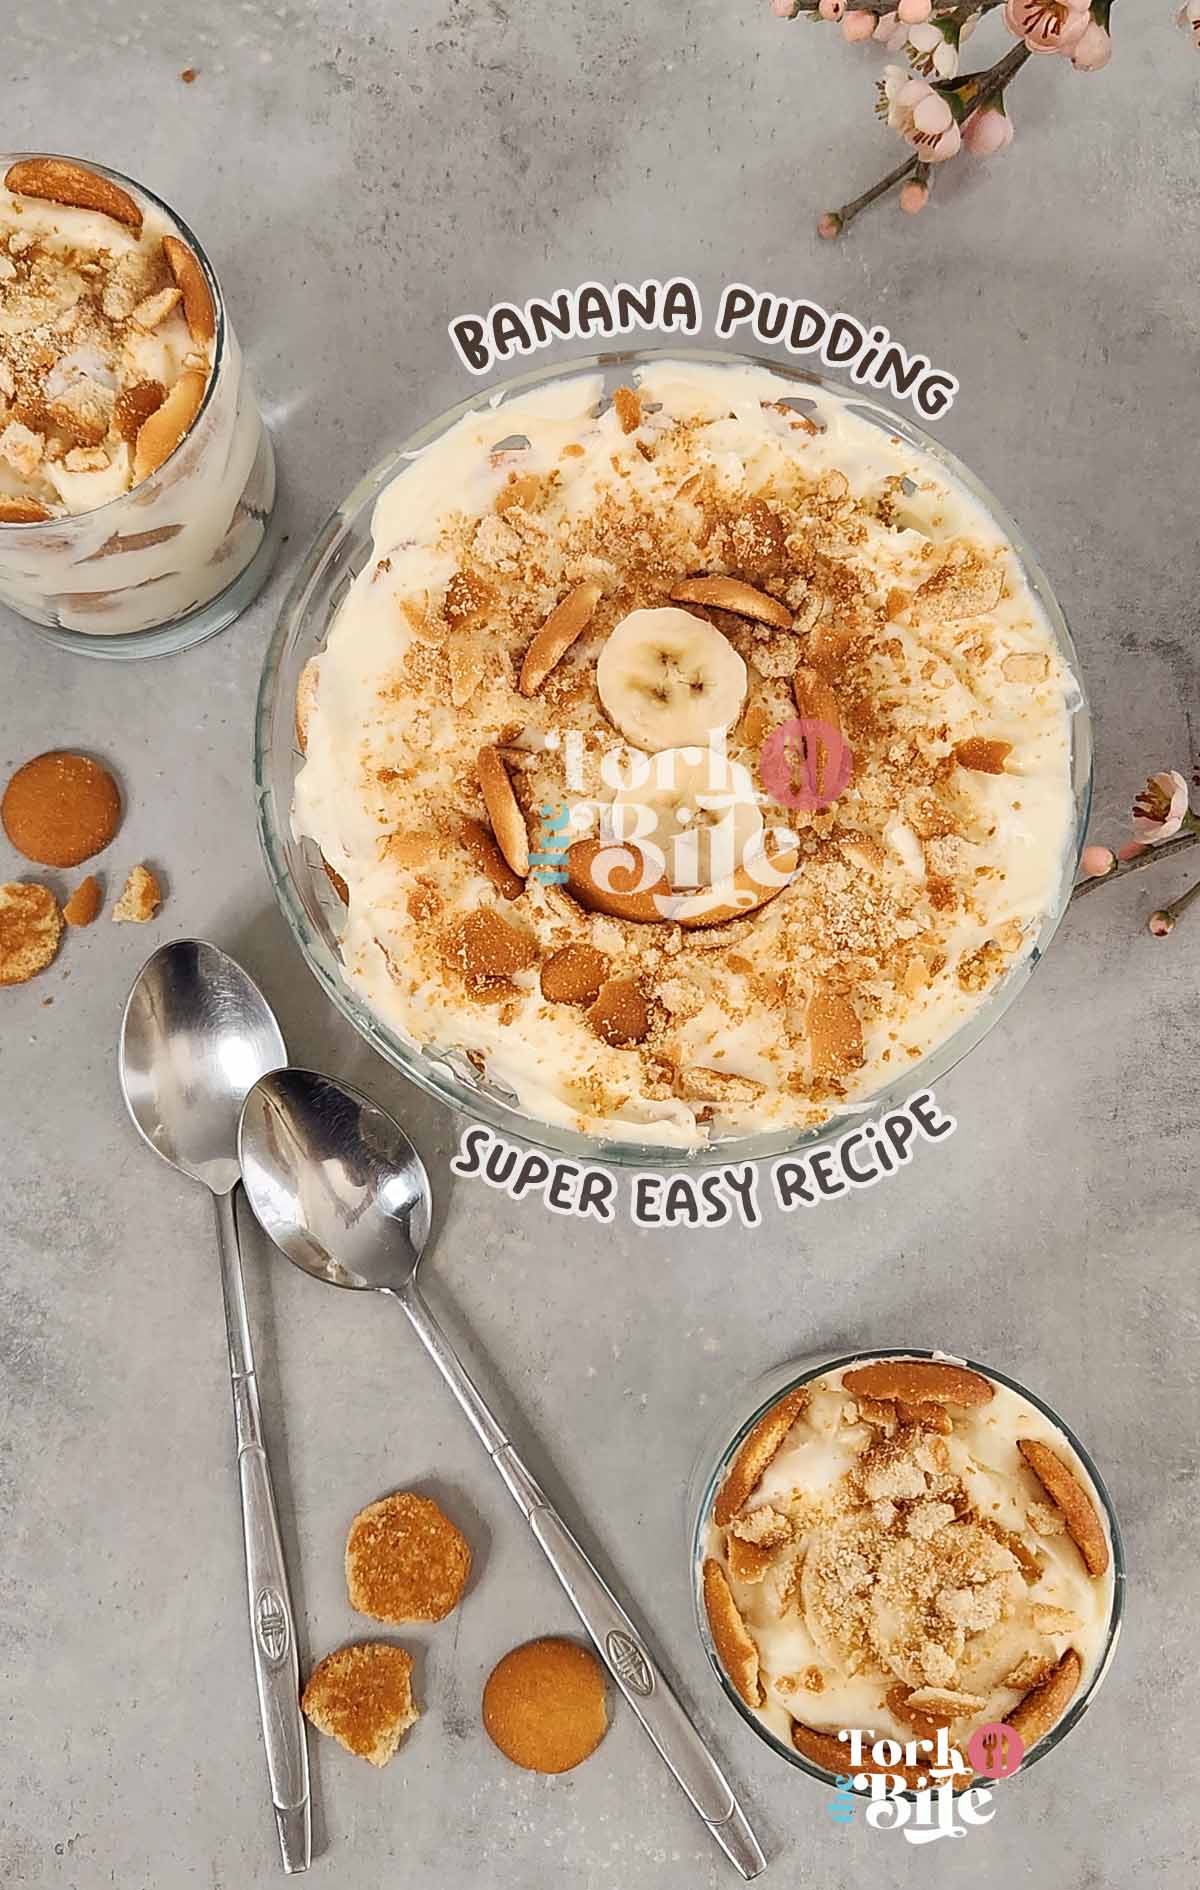 Indulge in the classic flavors of the Pioneer Woman Banana Pudding recipe. This dessert is perfect for any occasion with layers of creamy vanilla pudding, sliced fresh bananas, and Nilla Wafers.